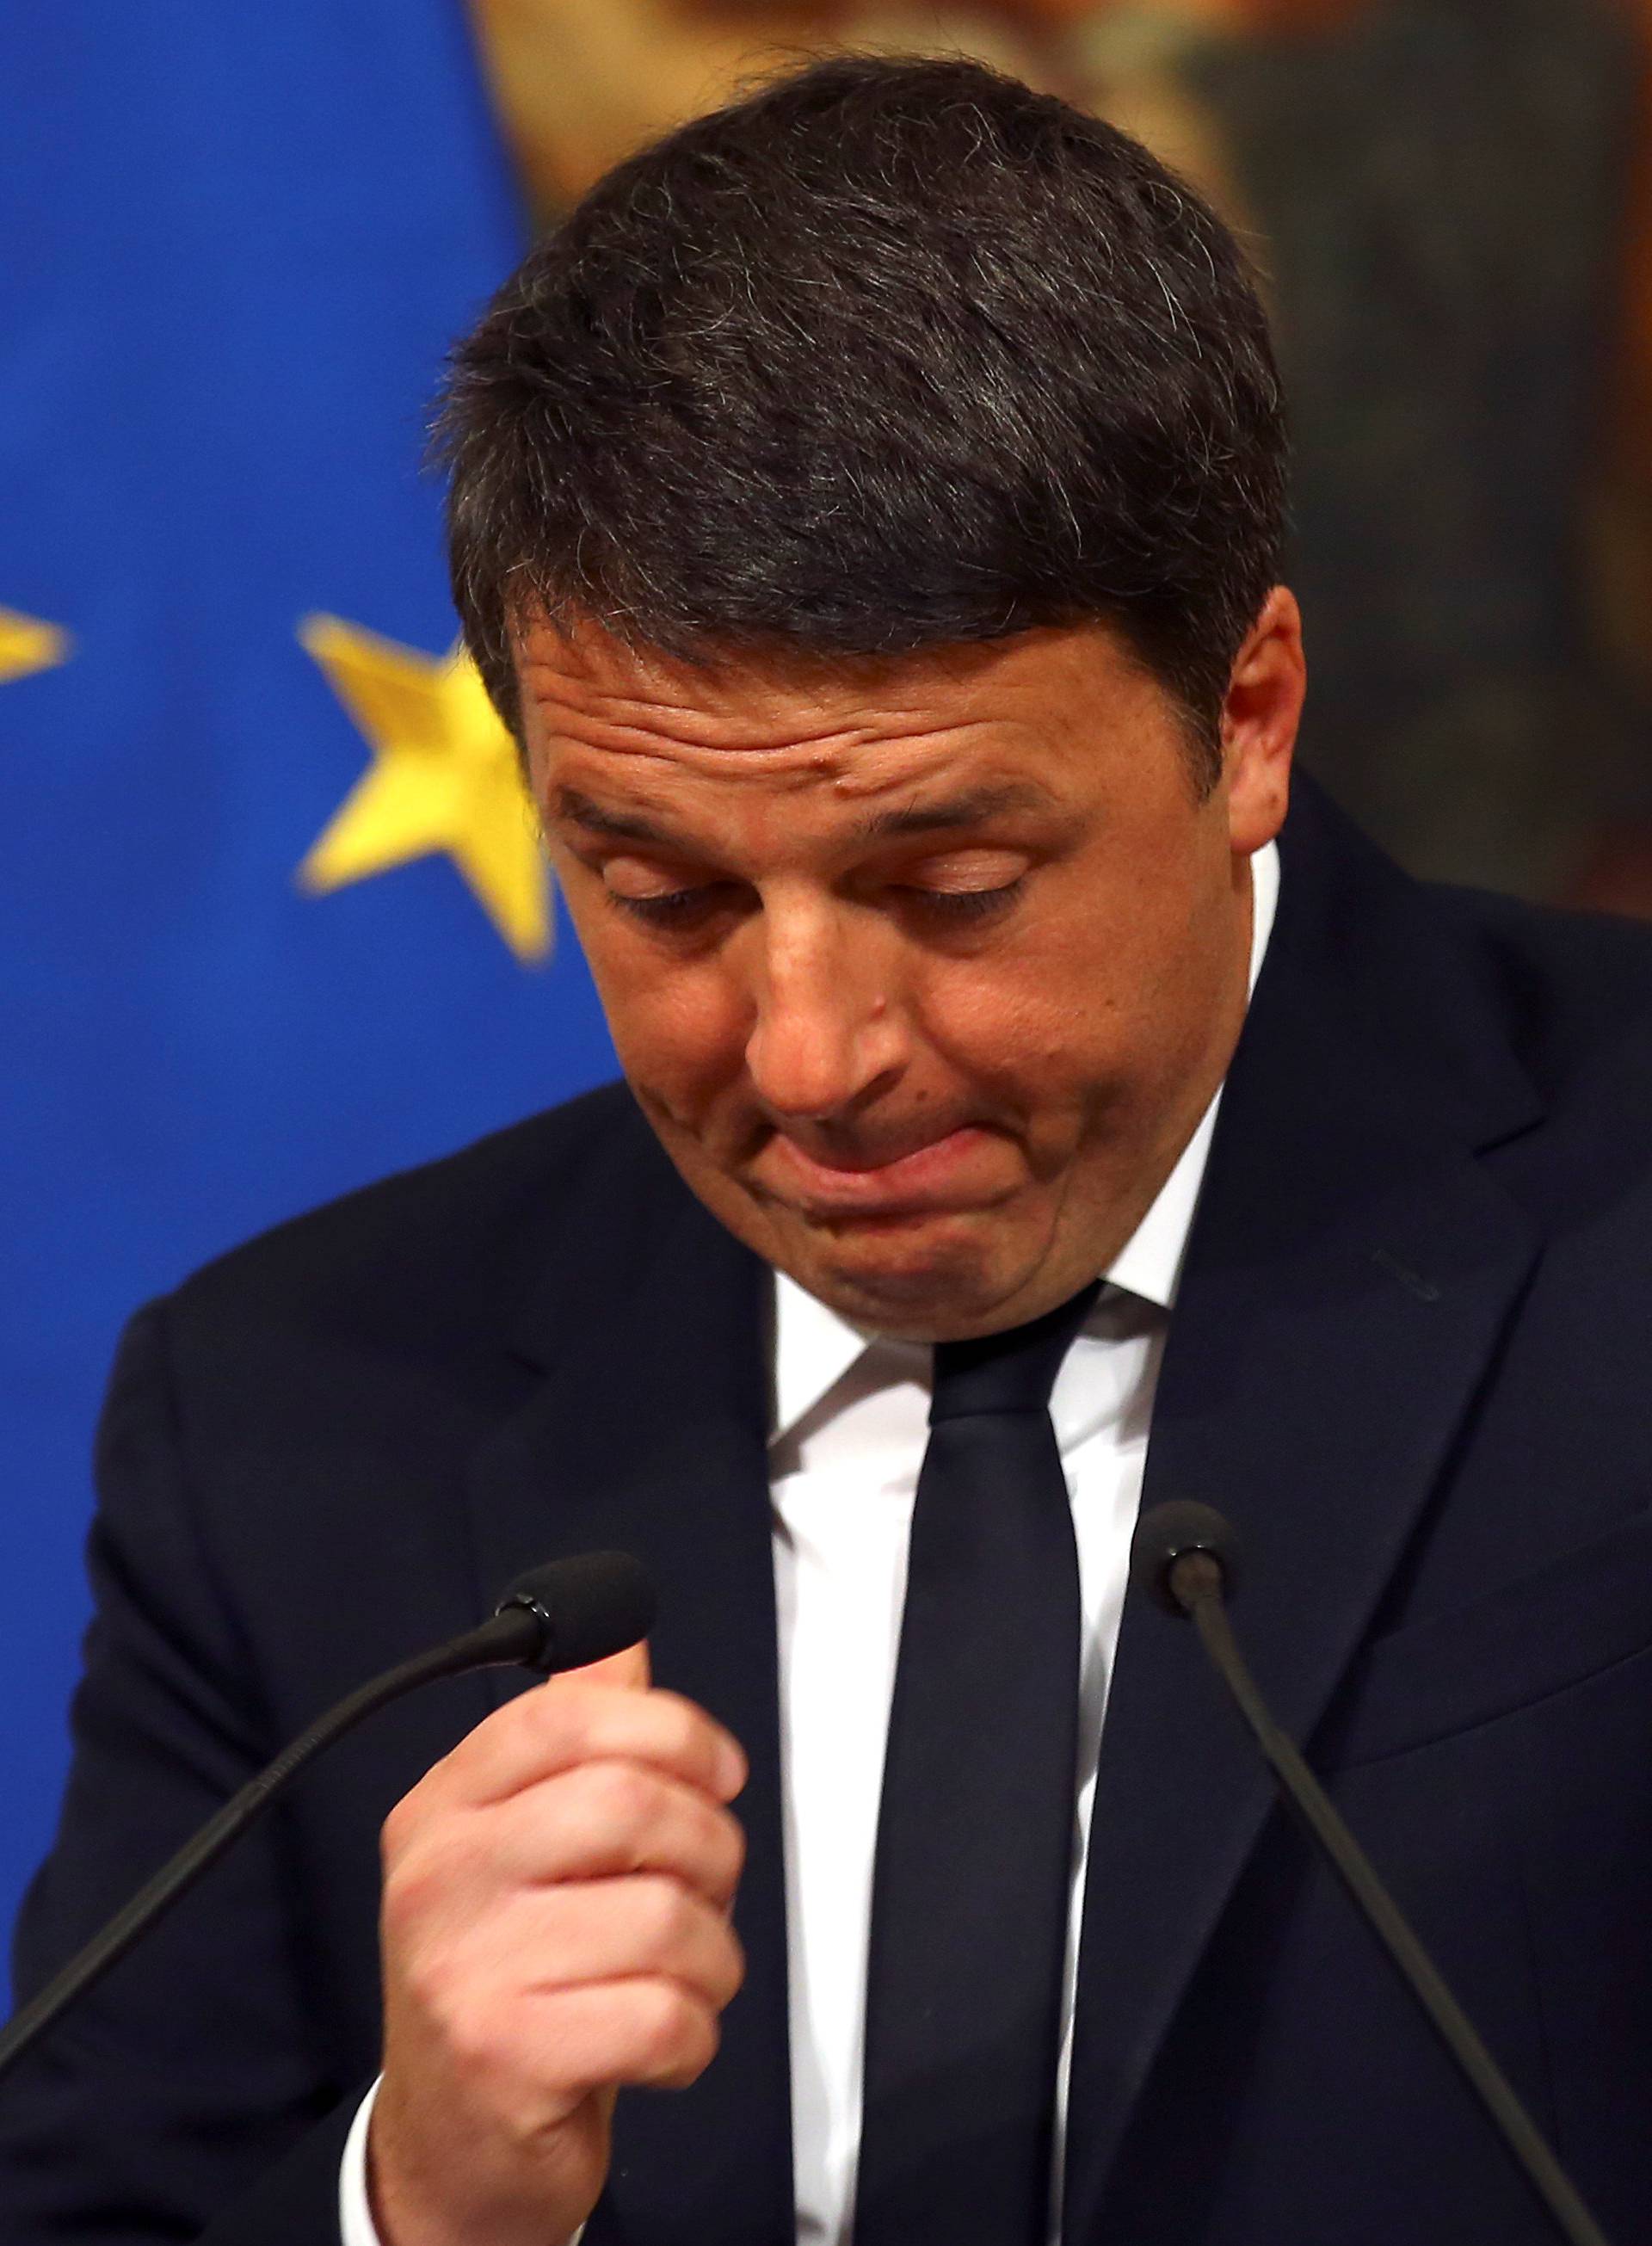 Italian Prime Minister Matteo Renzi gestures during a media conference after a referendum on constitutional reform at Chigi palace in Rome